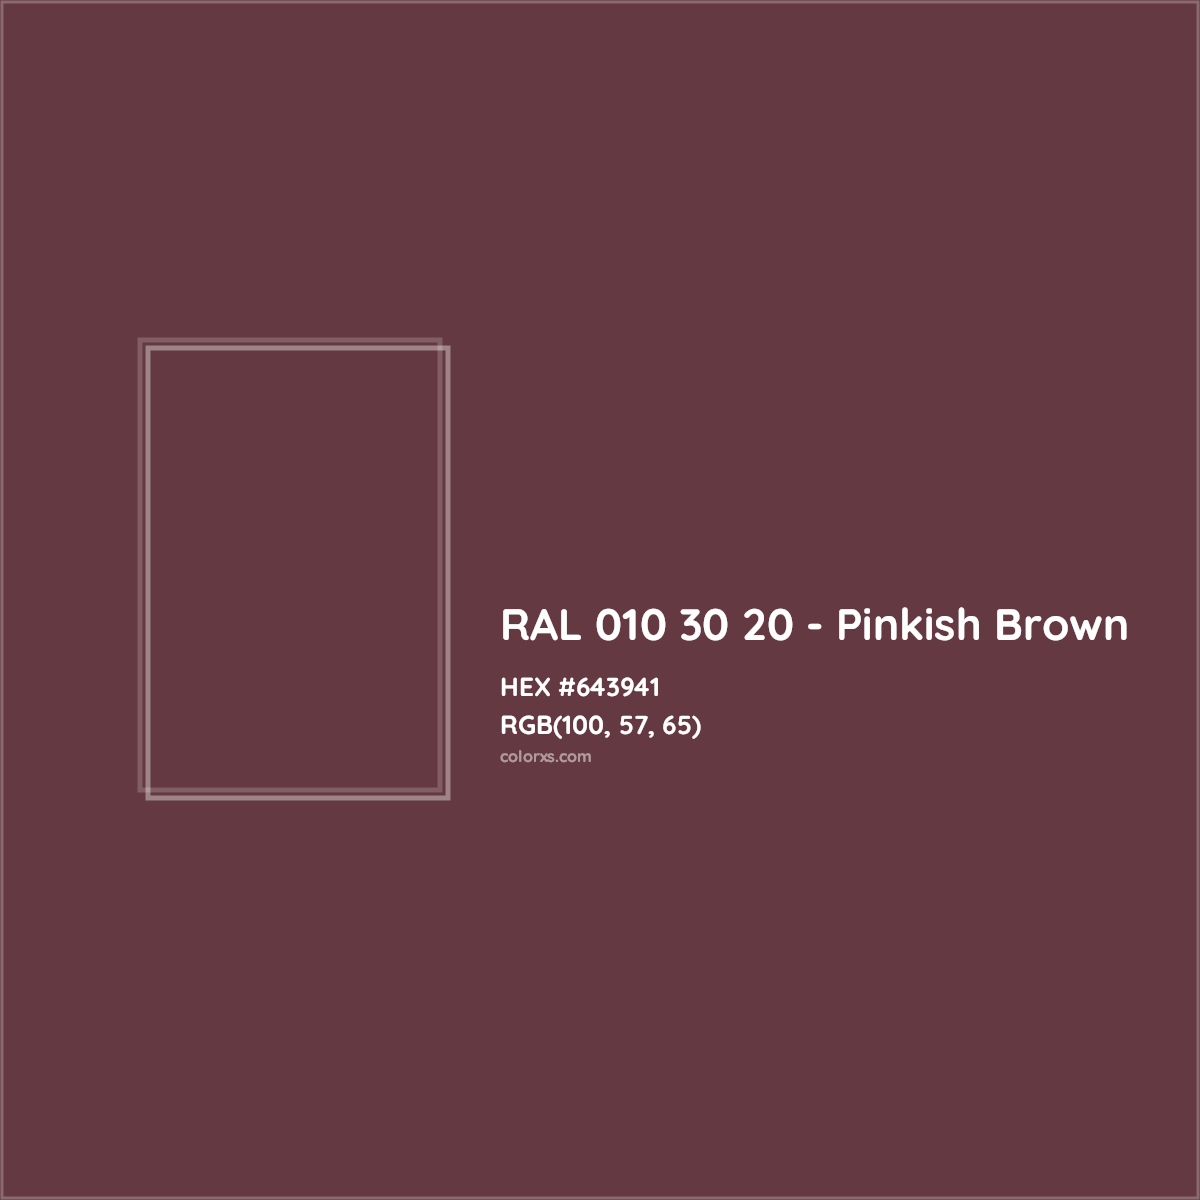 HEX #643941 RAL 010 30 20 - Pinkish Brown CMS RAL Design - Color Code